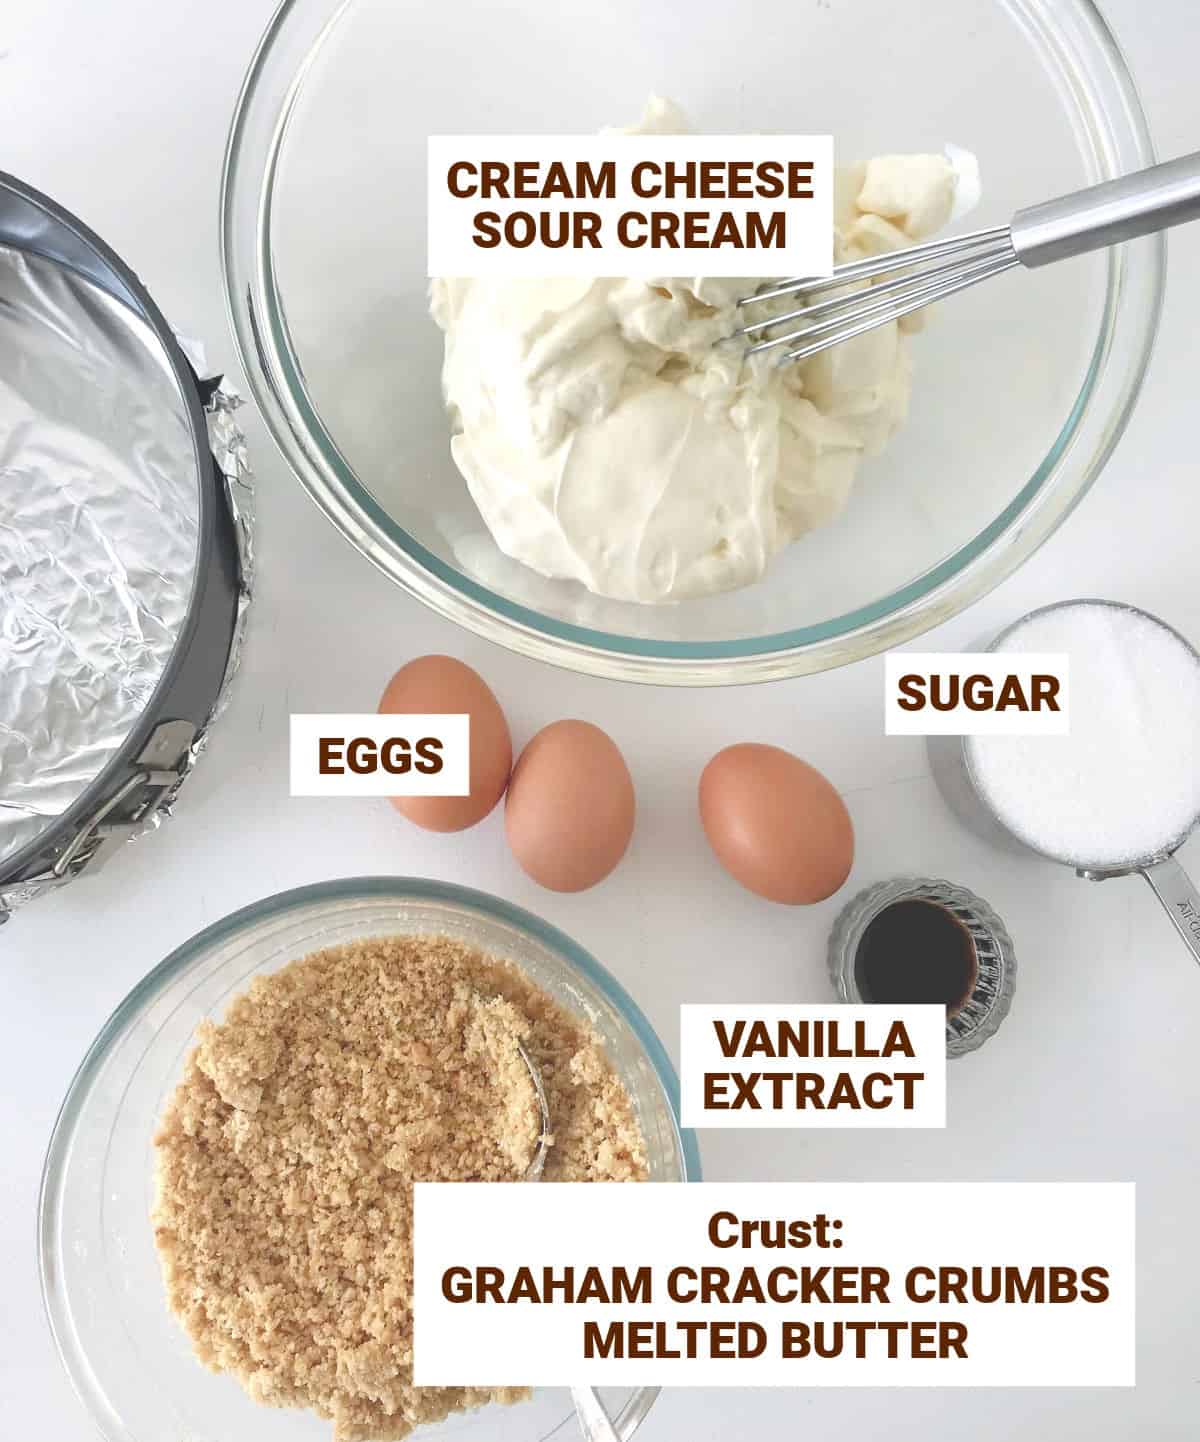 White surface with bowls with ingredients for cheesecake including eggs, sugar, crust mixture, sour cream, vanilla. Text overlay.